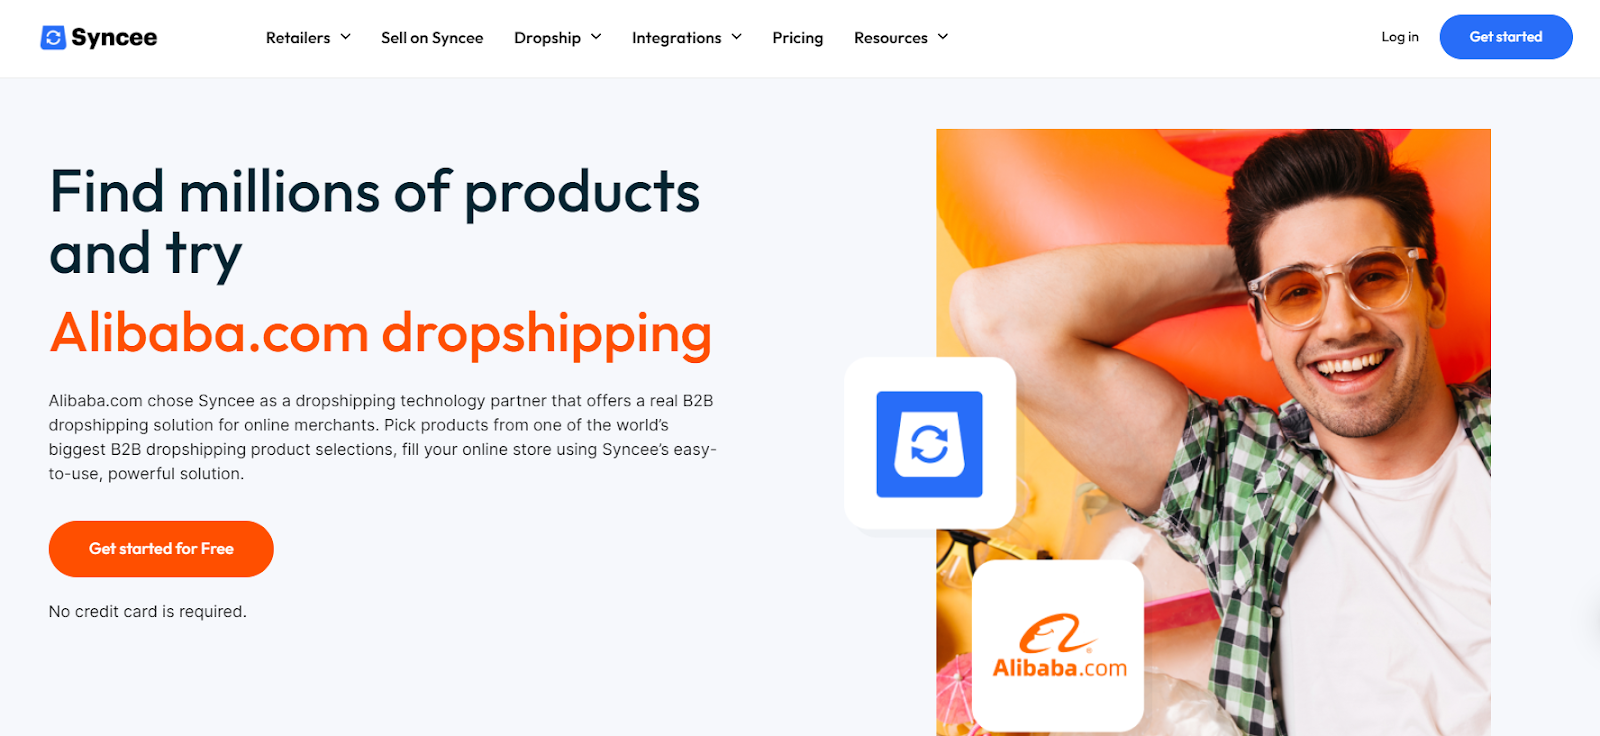 Syncee: official Alibaba partner. Home page of the Syncee app.